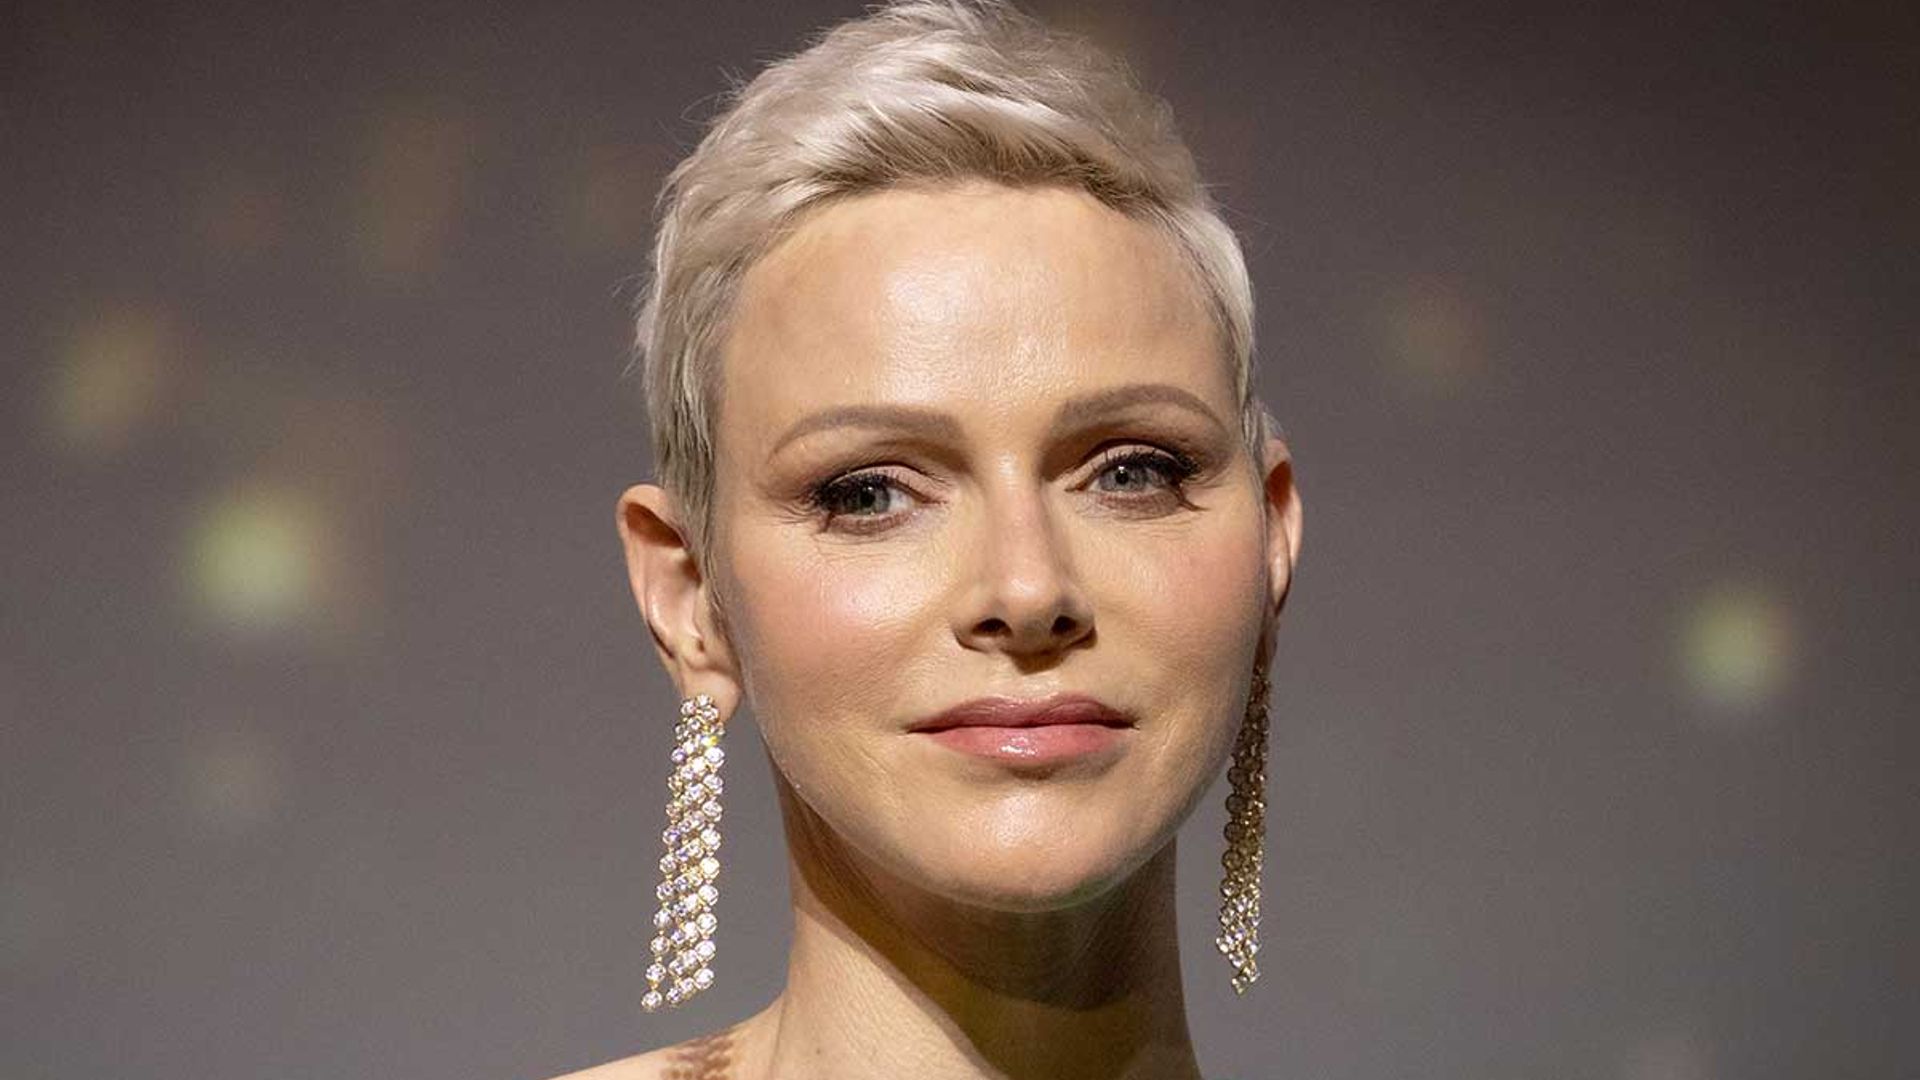 Princess Charlene Of Monaco Looks The Picture Of Health During Glamorous New Appearance Hello 